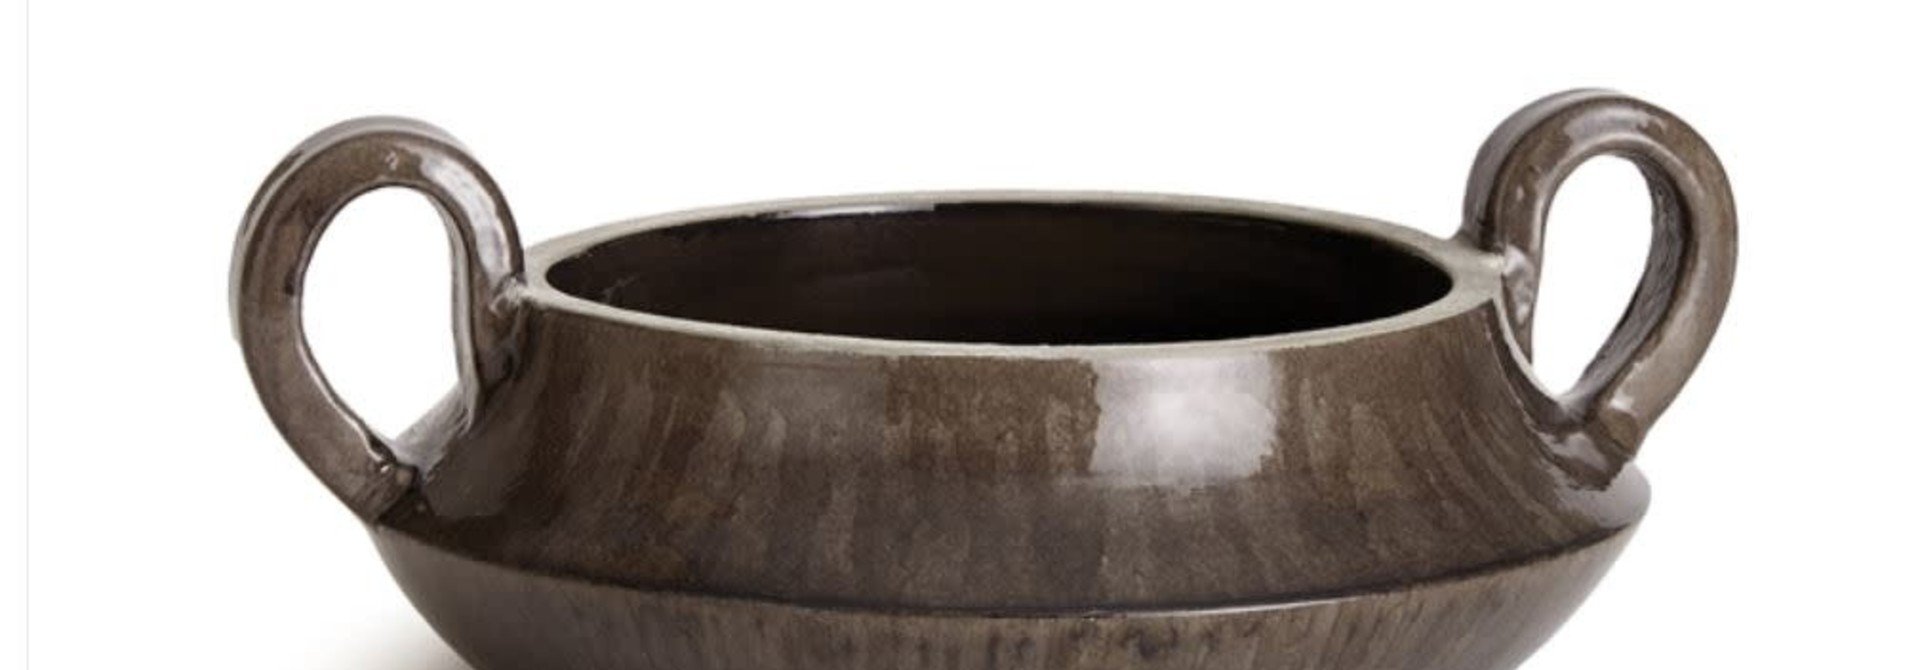 Ciara Bowl  | The Accessory Collection. Gray - 14.5 Inch x 14.5 Inch x 5 Inch